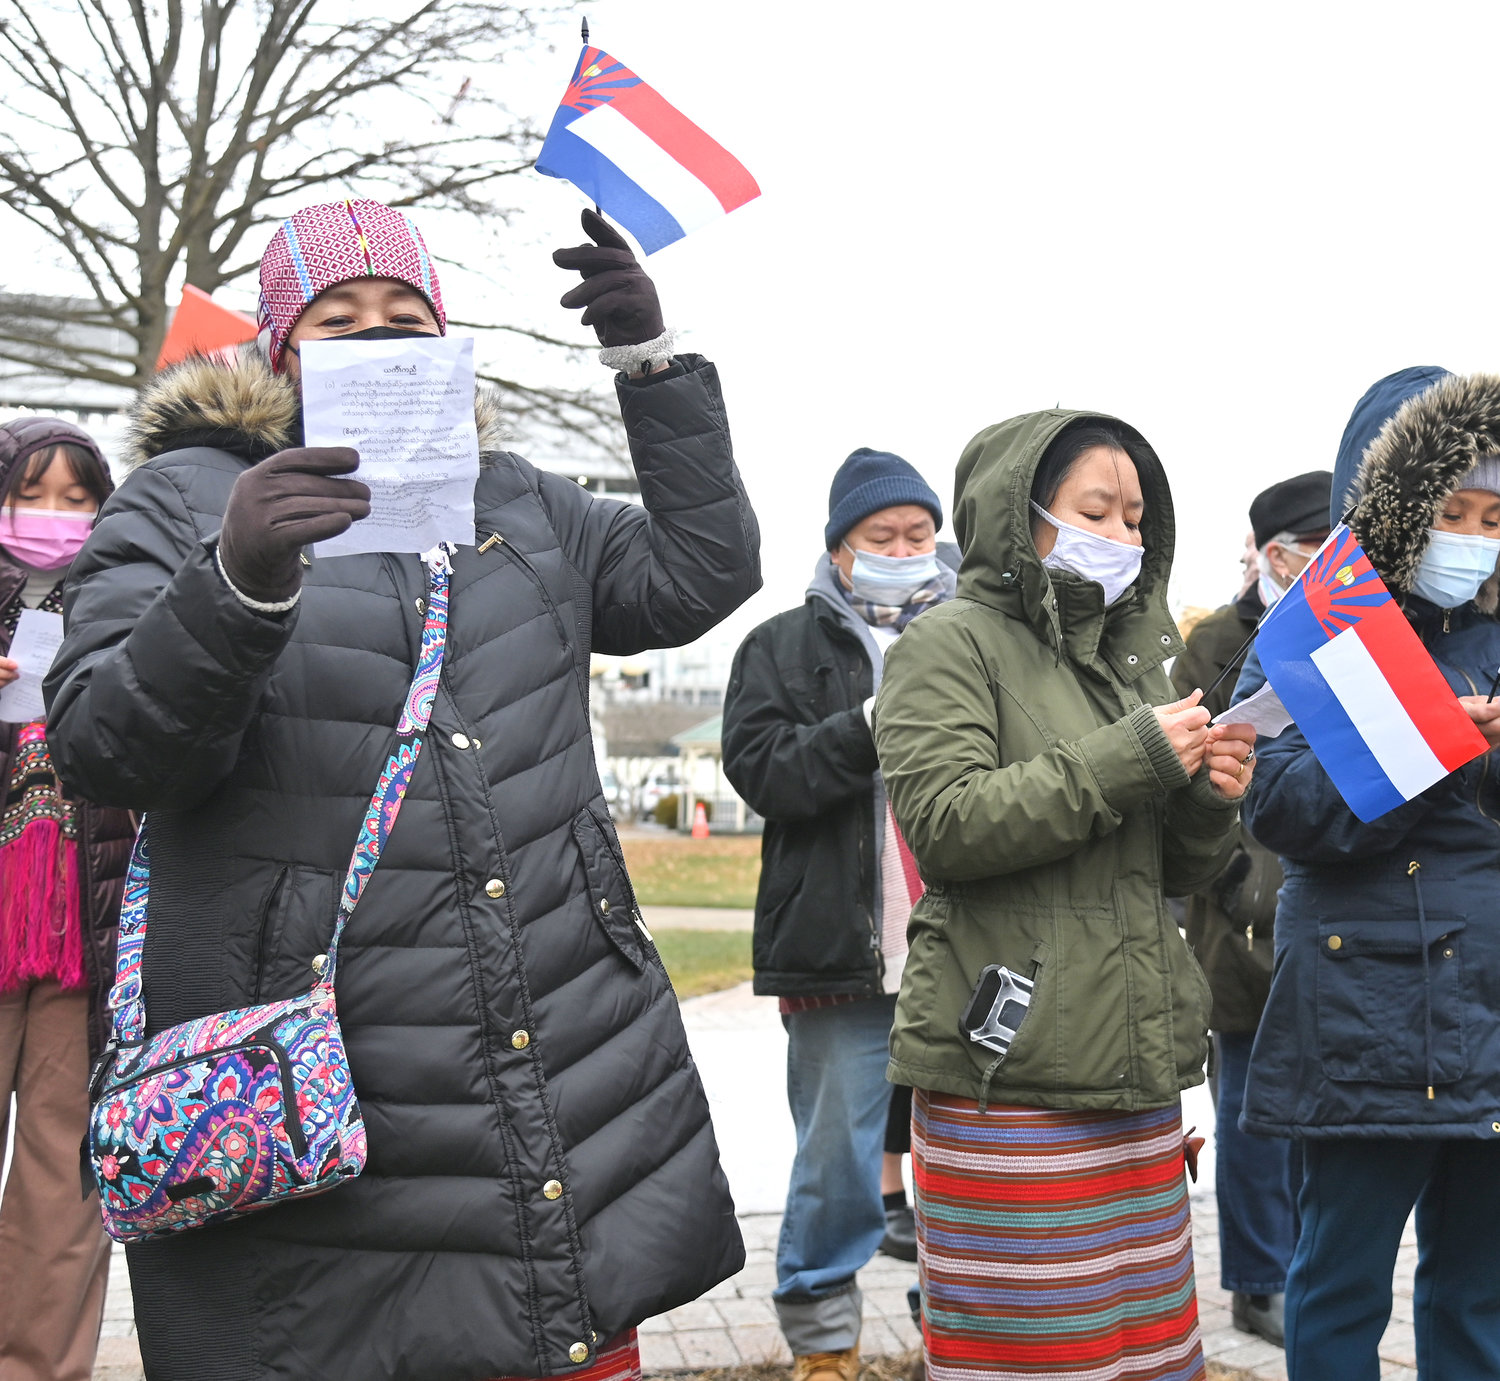 Sayway Htoo raises her flag while singing during the Karen Community Flag raising ceremony at Utica City Hall. Next to her, Lah Hser is also singing.